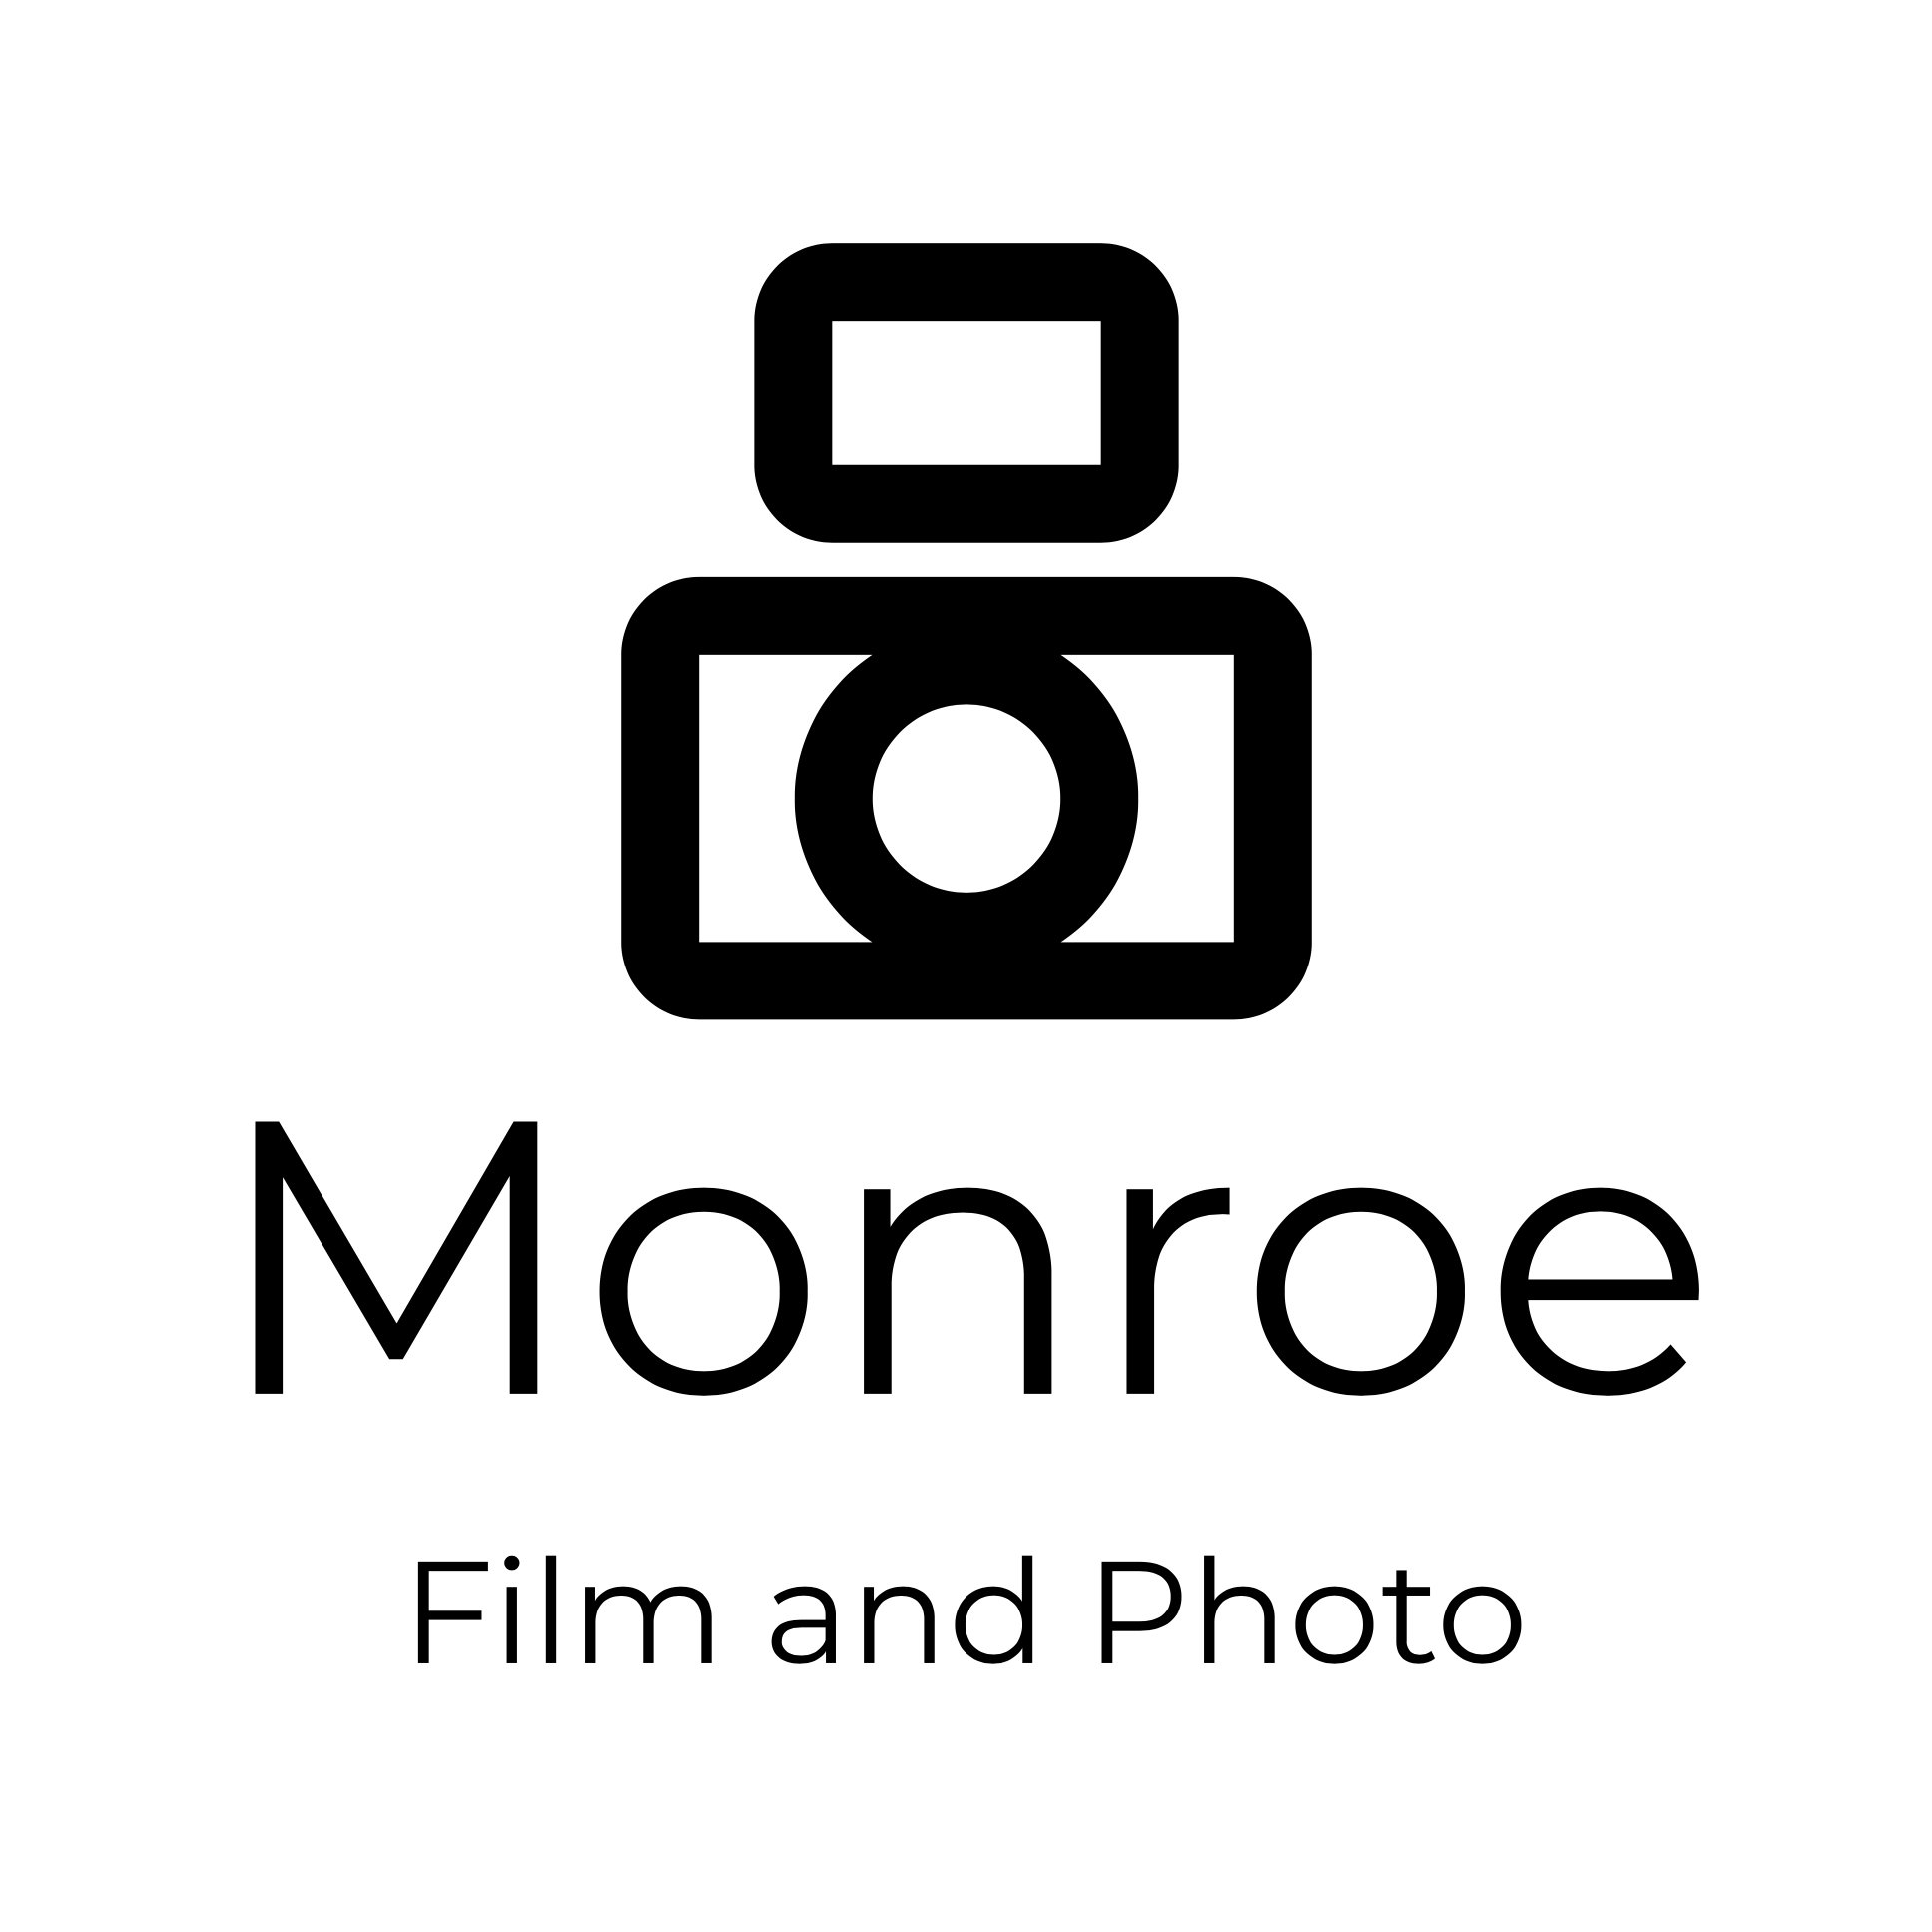 Monroe Film and Photo is an award-winning wedding videography and photography production company in Minneapolis, Twin Cities and Saint Paul MN.